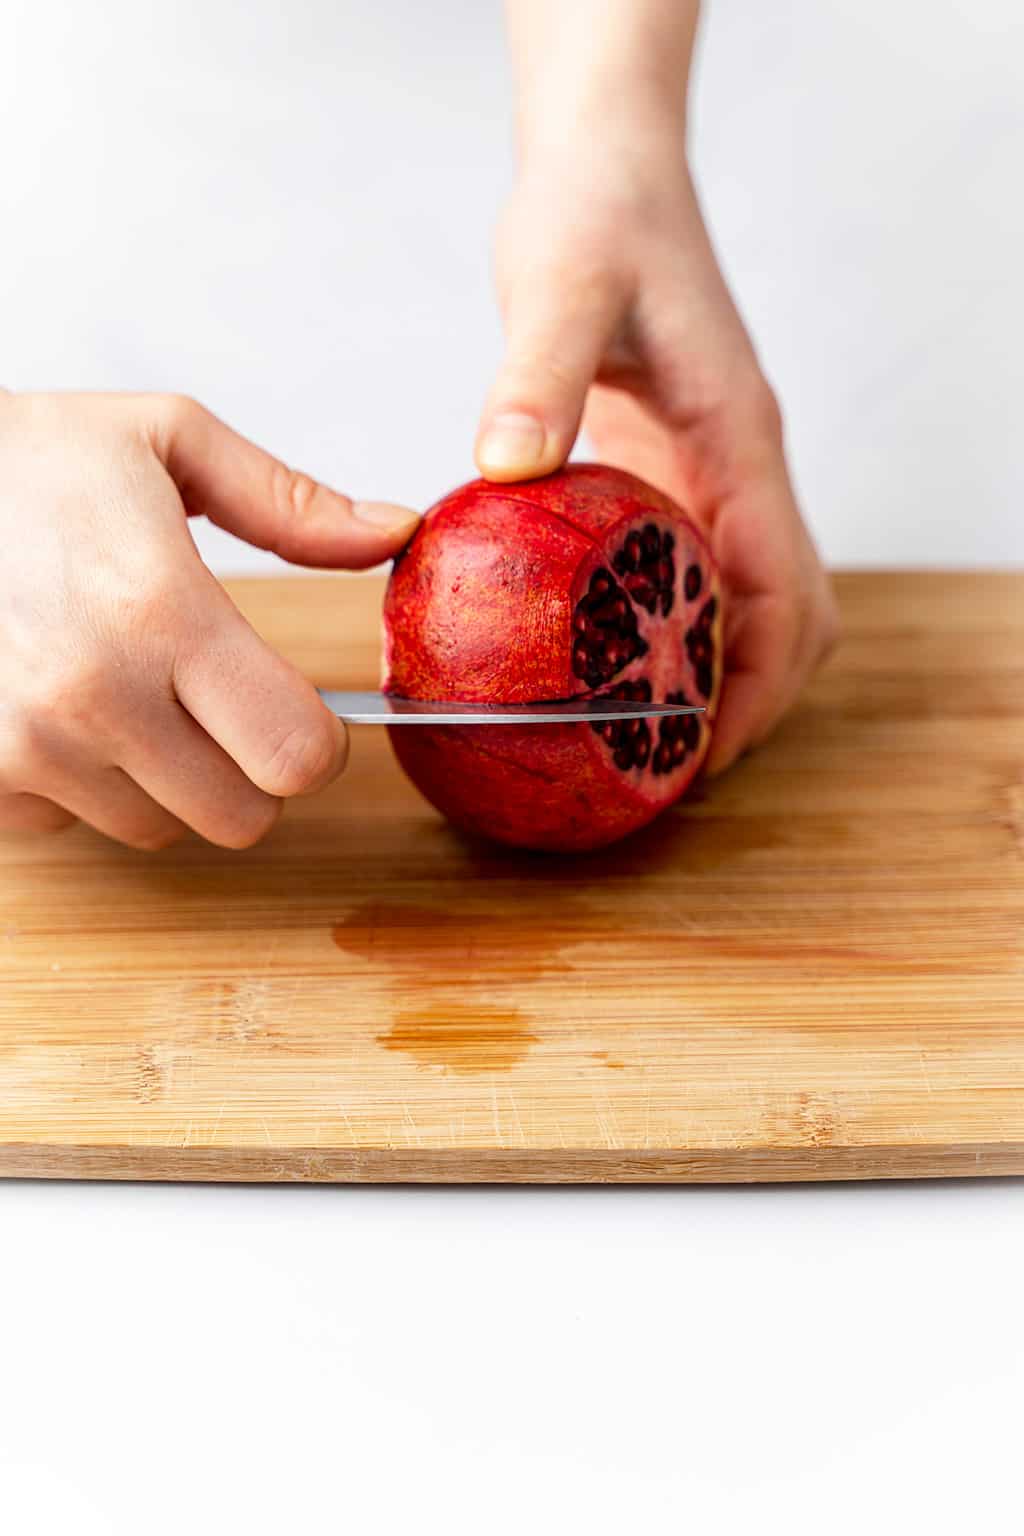 slicing the pomegranate skin with a knife on cutting board